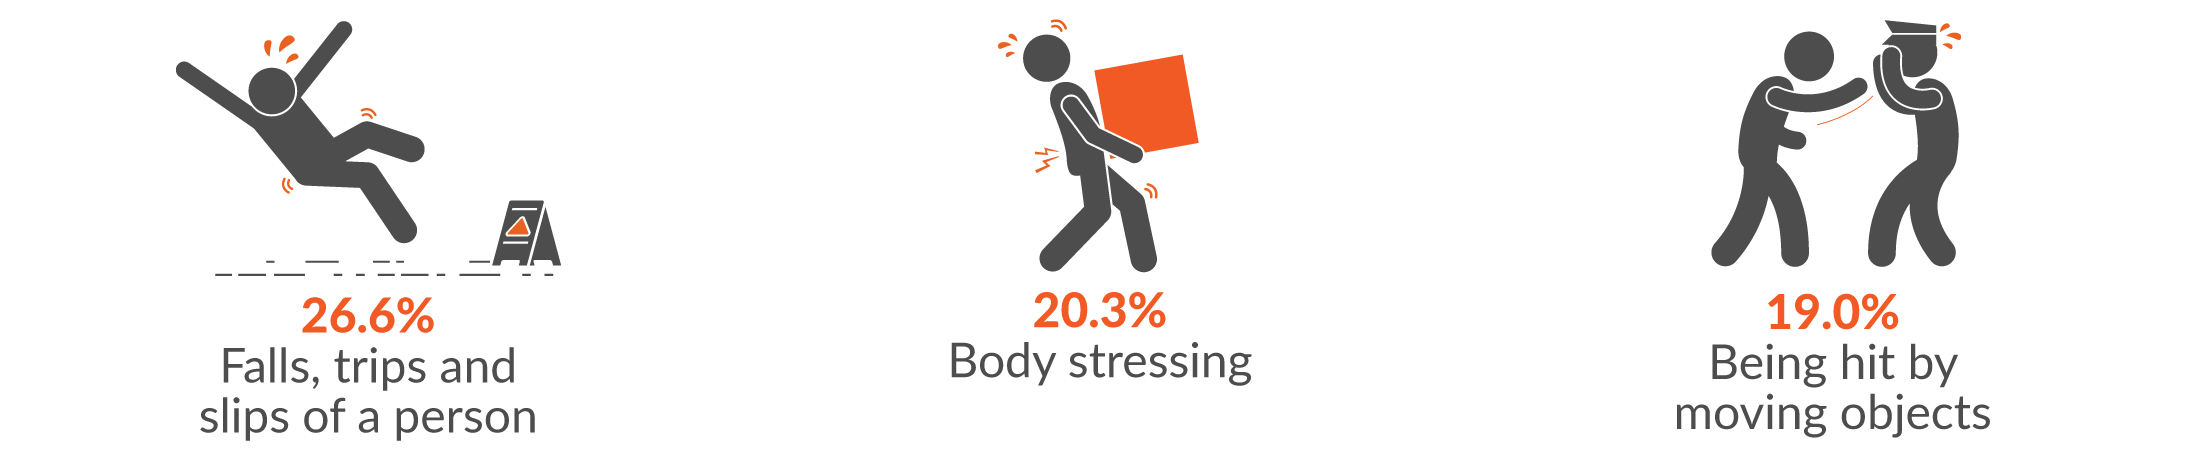 This infographic shows the main three mechanisms of serious injury for Government Administration and Defence claims were 26.6% falls, trips and slips of a person; 21.9% body stressing; and 20.3% being hit by moving objects.